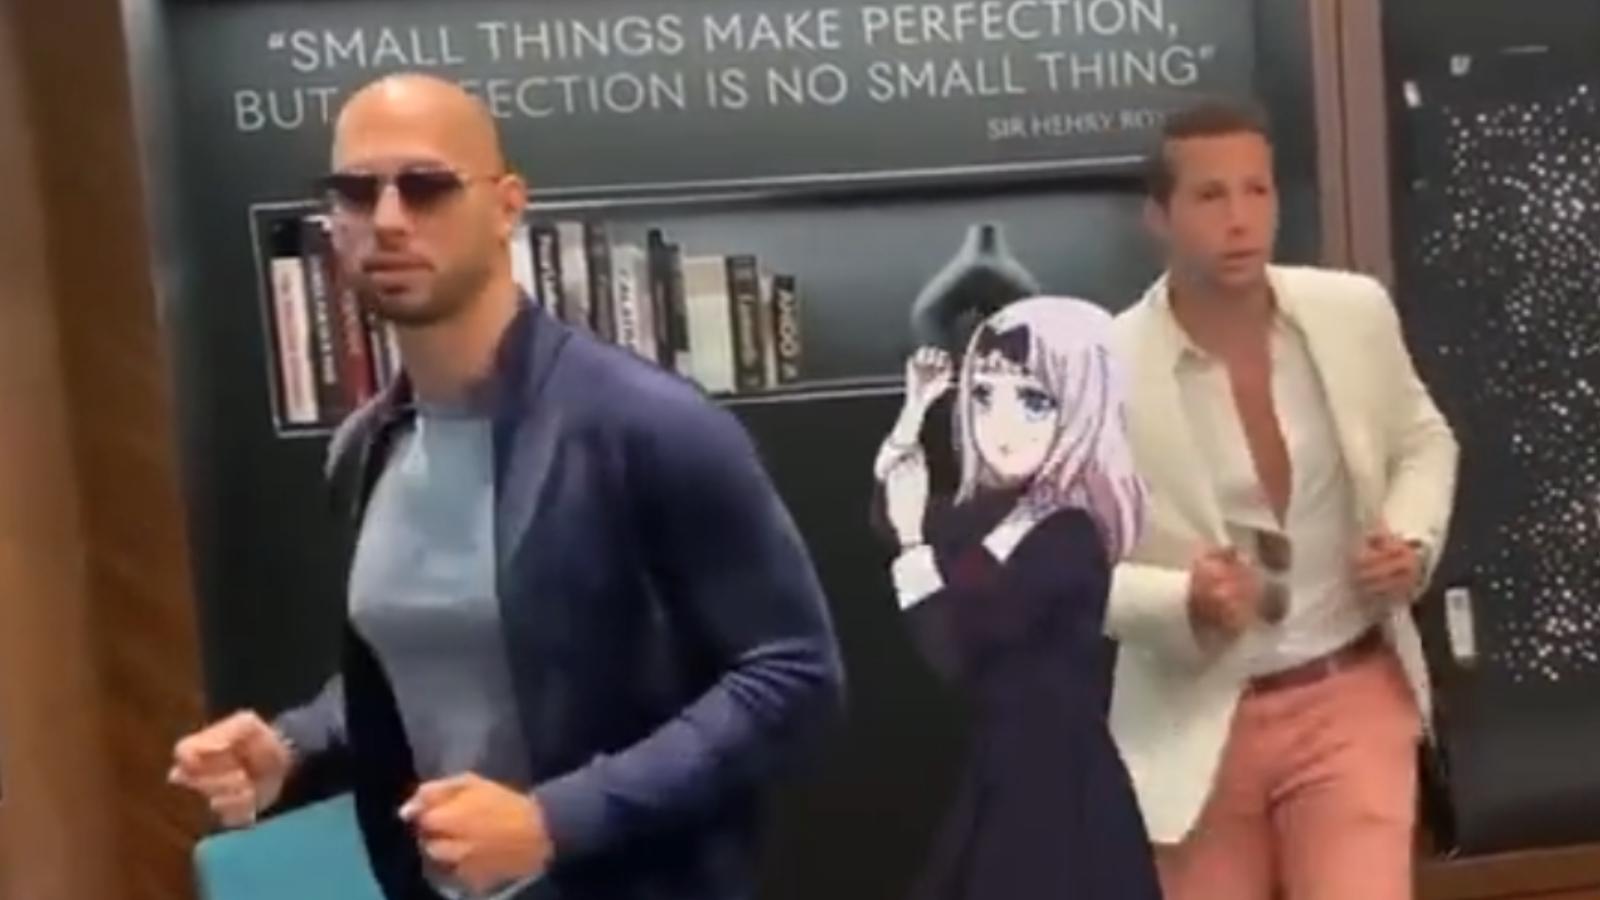 andrew tate dancing with anime girl